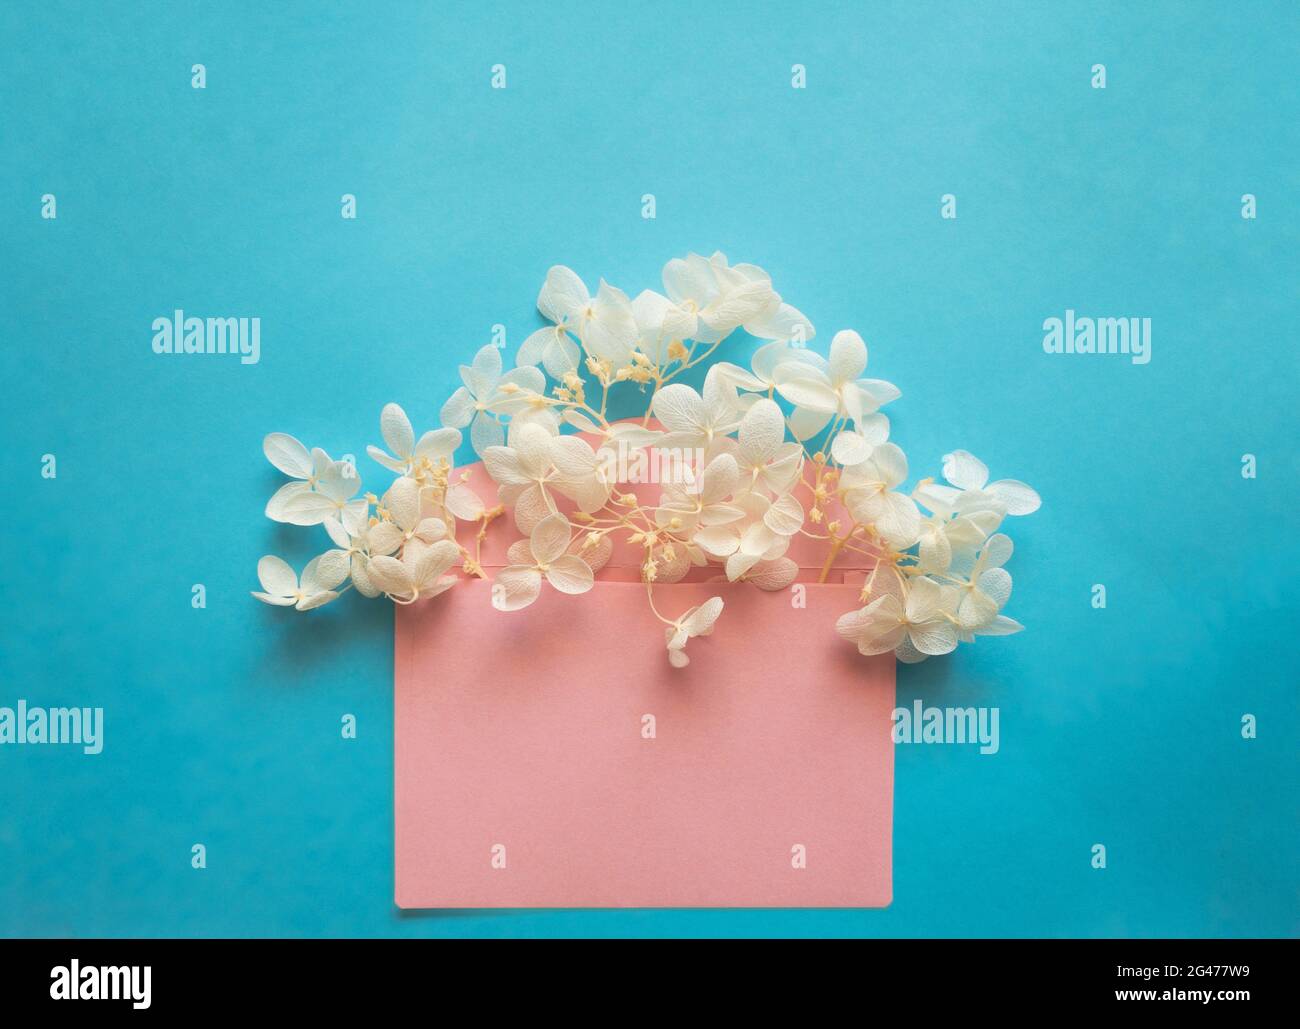 Pink envelope with white flowers hydrangea inside on a blue background. Stock Photo